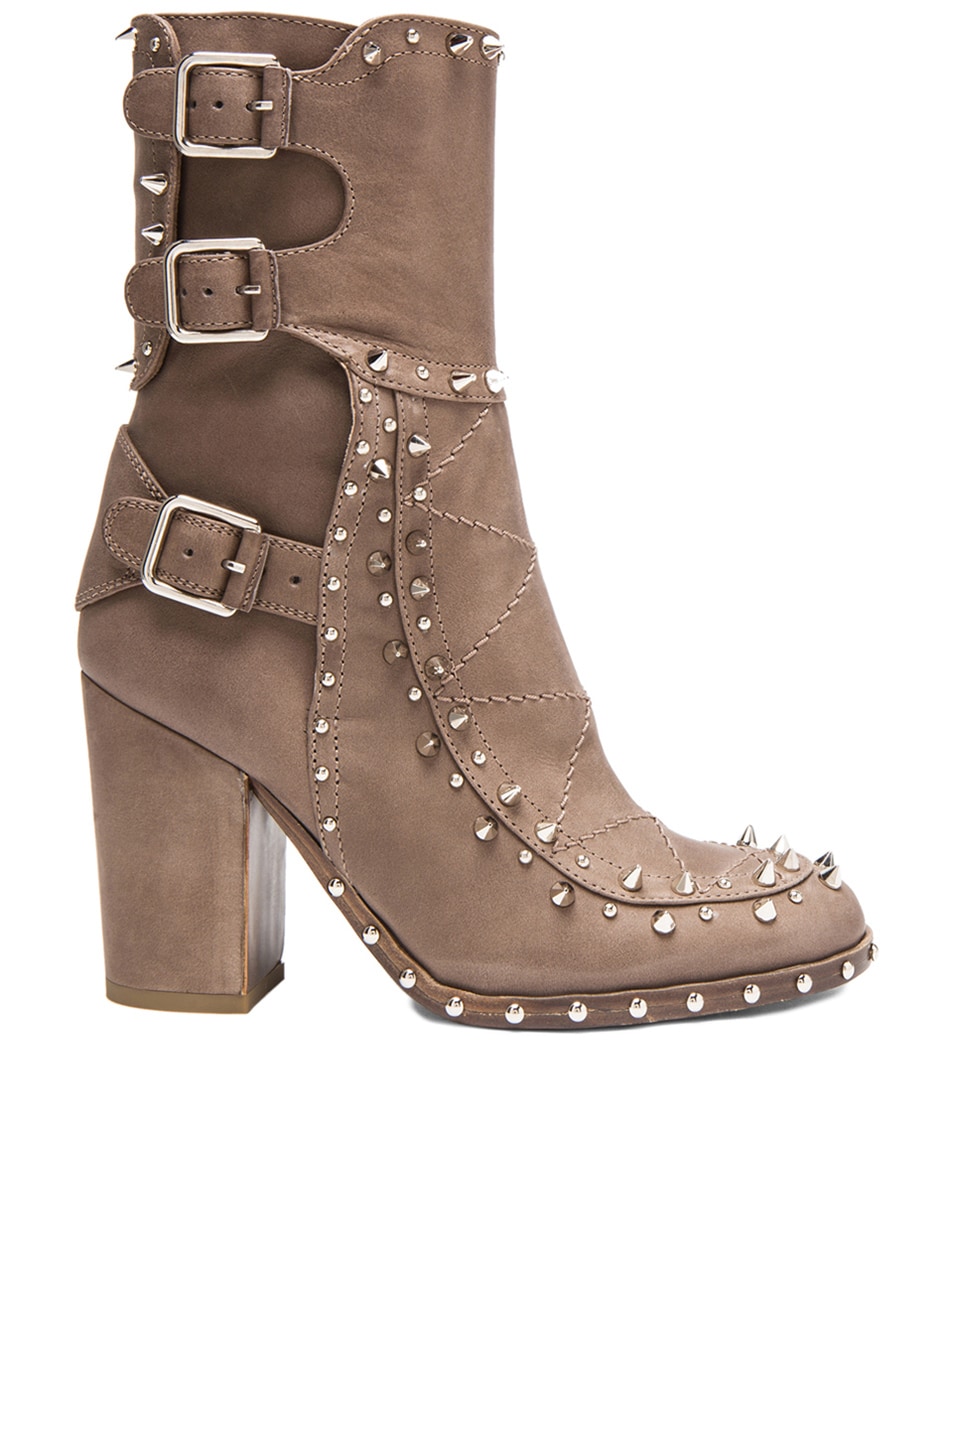 Image 1 of Laurence Dacade Baulence Calfskin Leather Booties in Grey & Silver